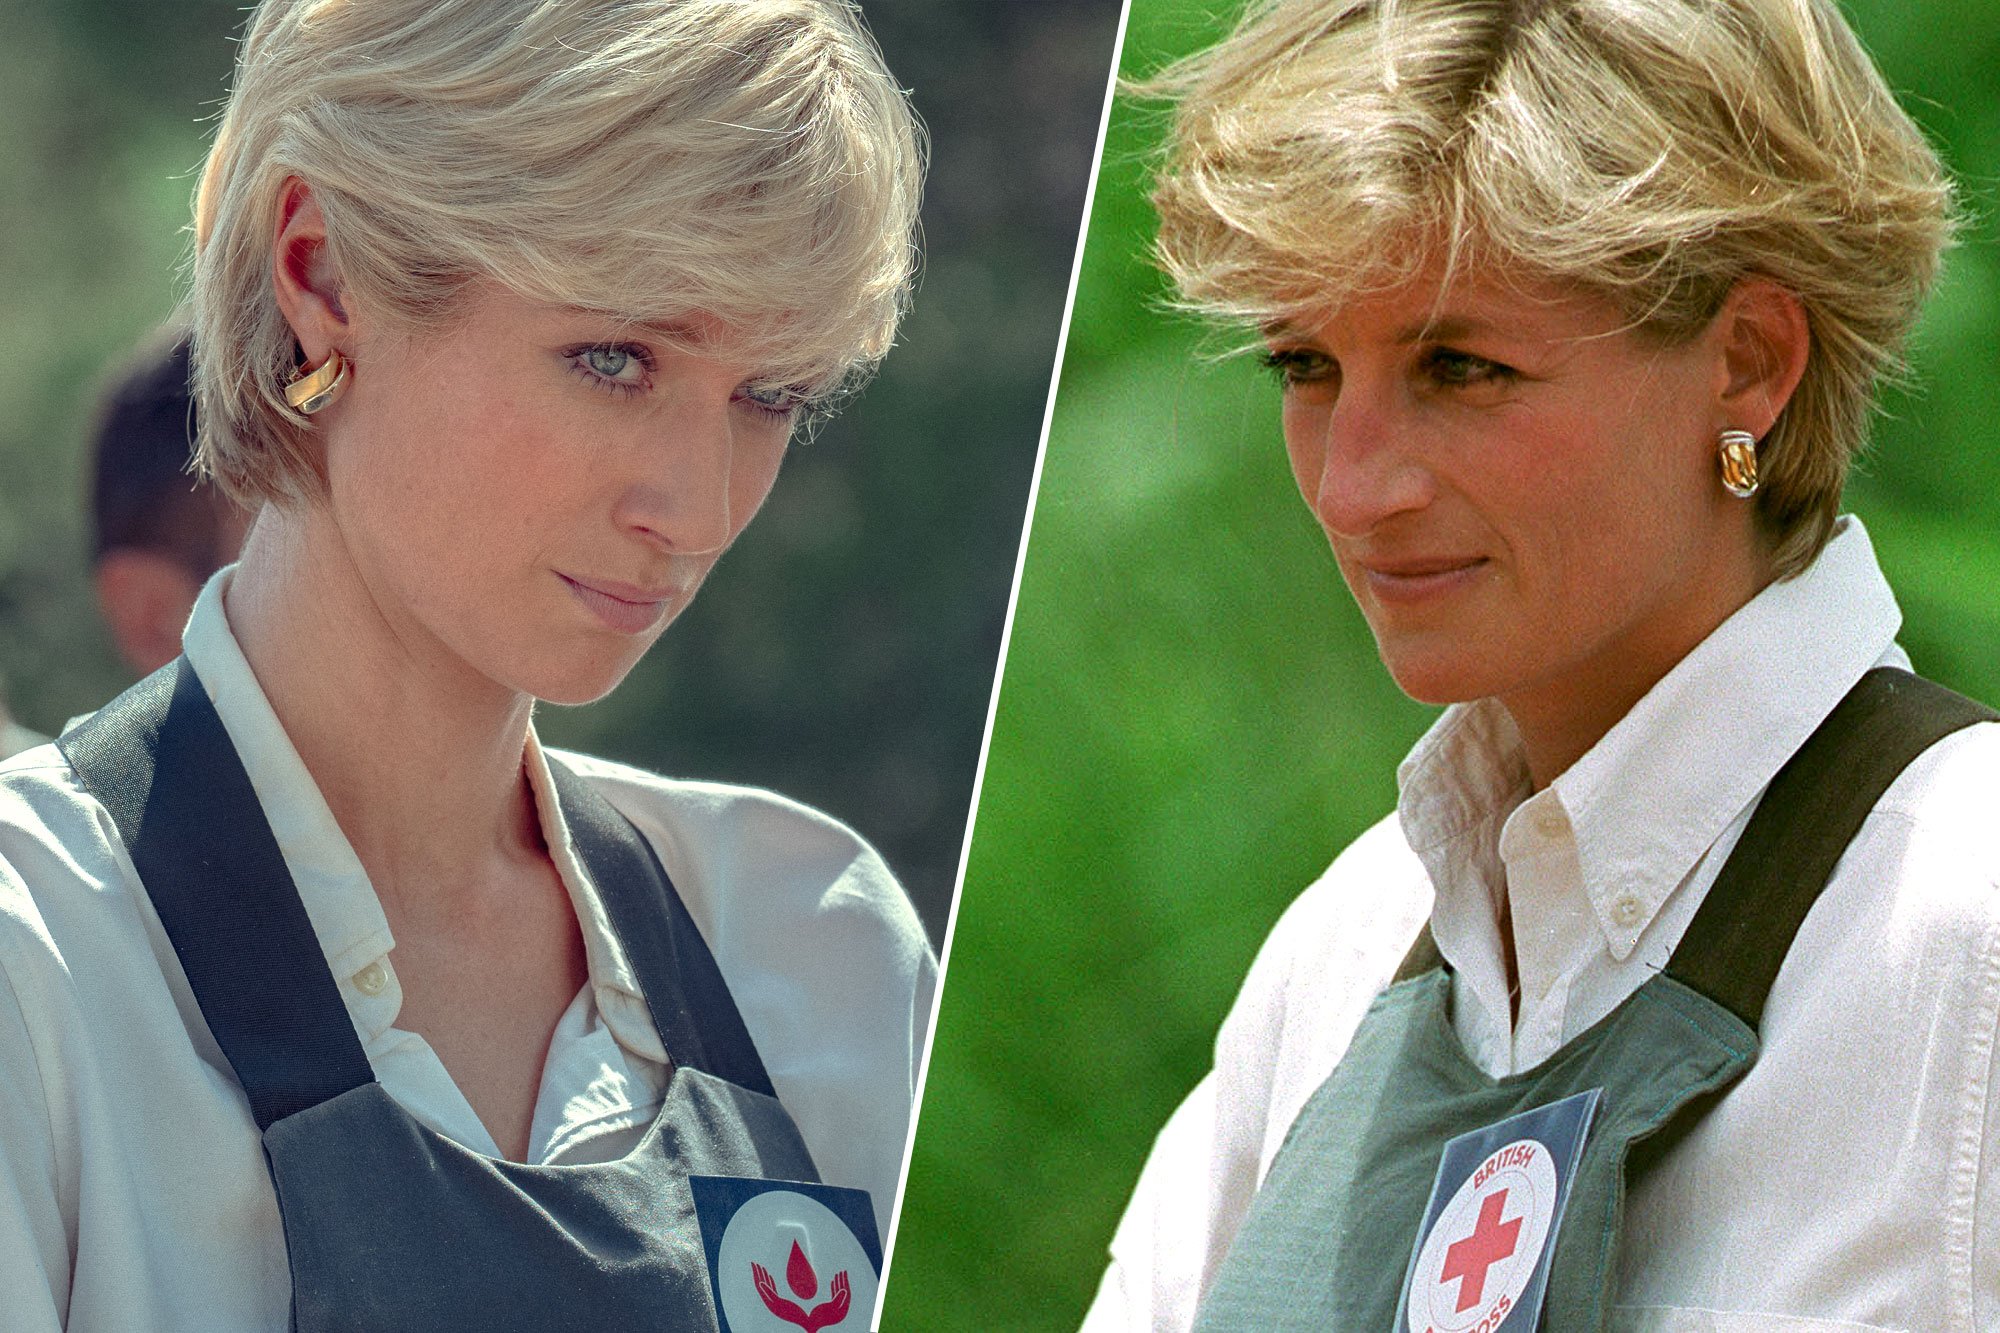 ‘The Crown’ Creator Defends Choice to Use Princess Diana’s ‘Ghost’ in Final Season